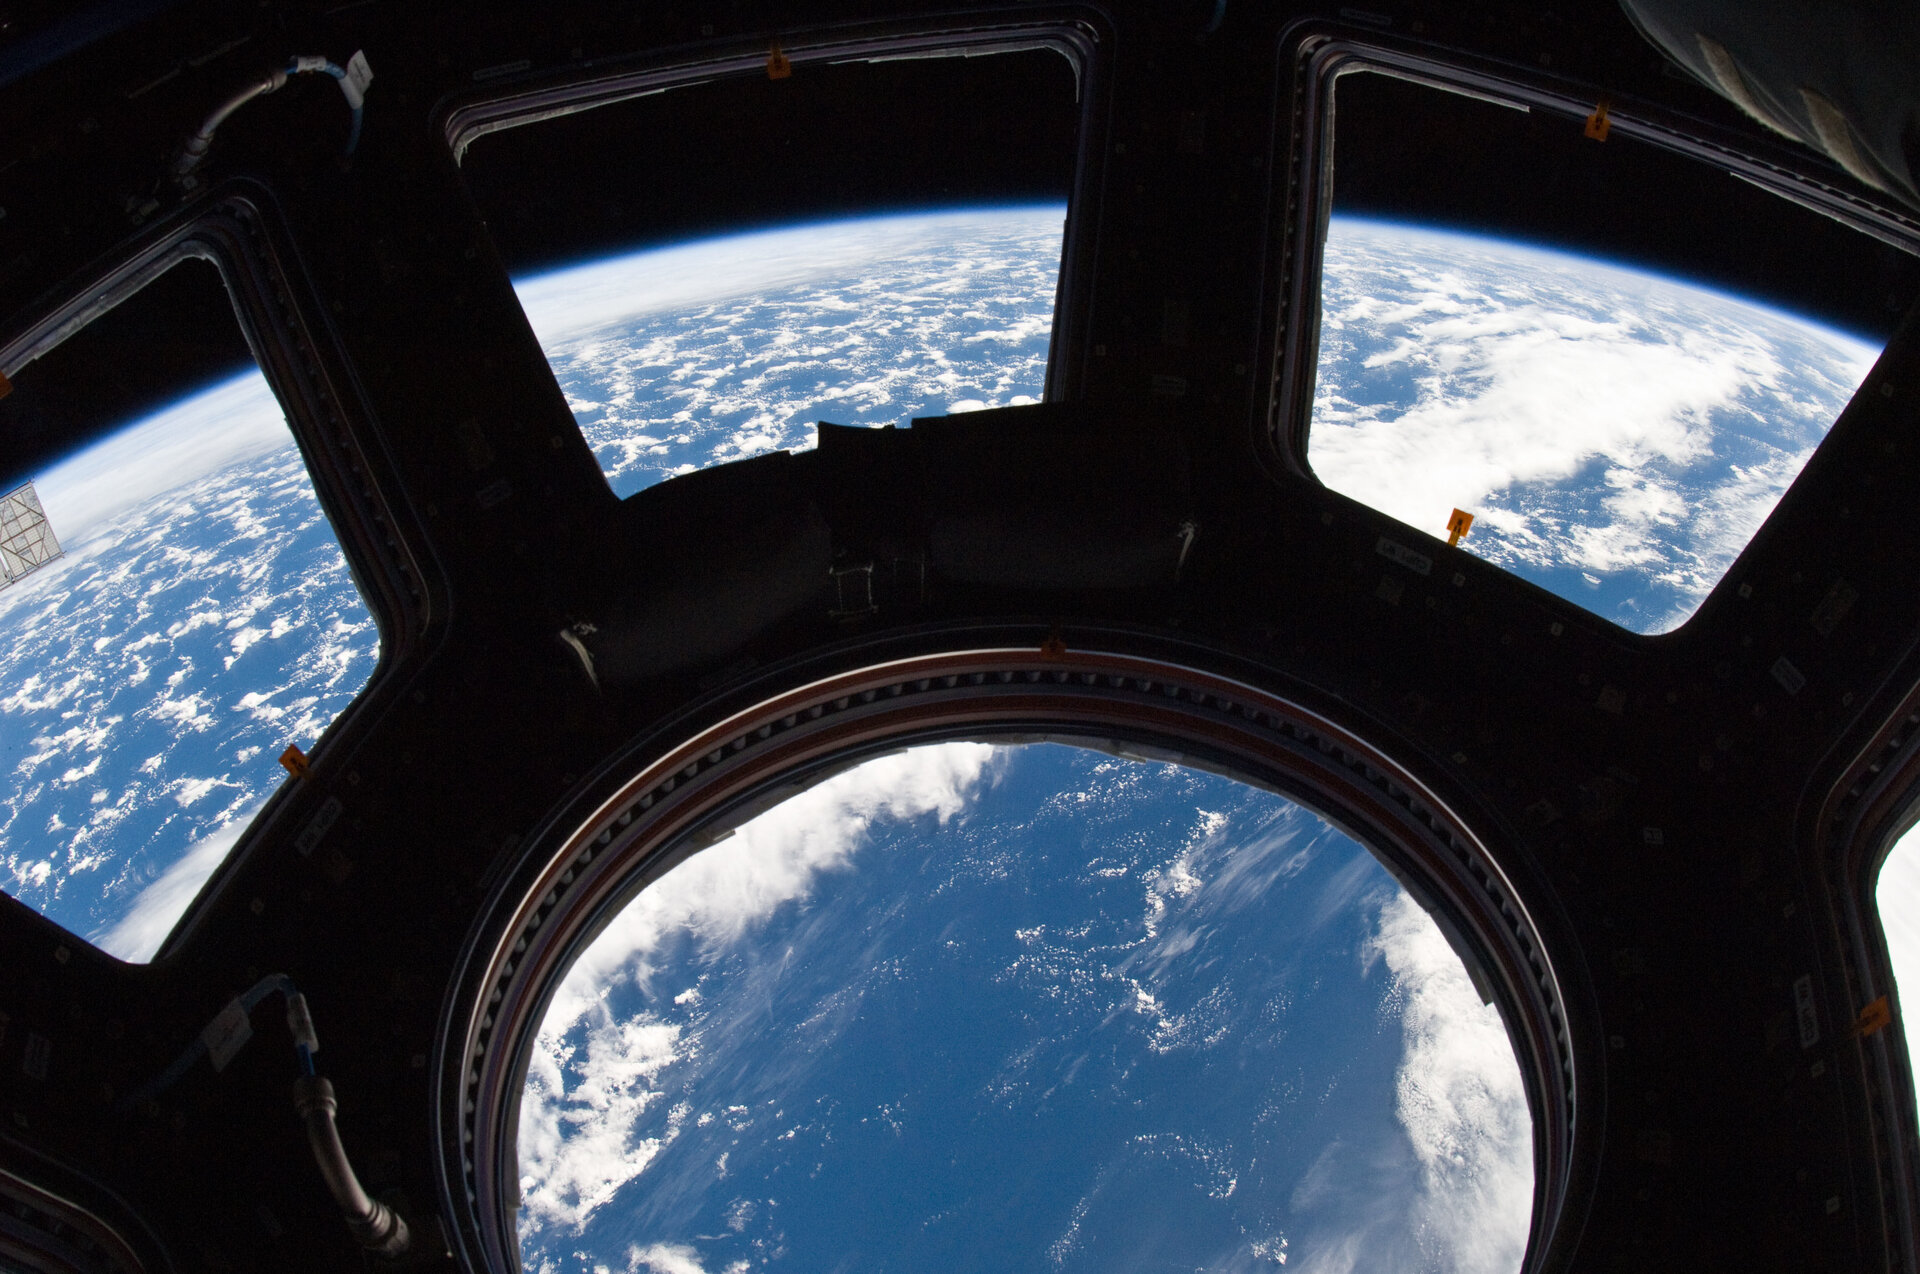 Earth and its horizon seen through the windows in Cupola